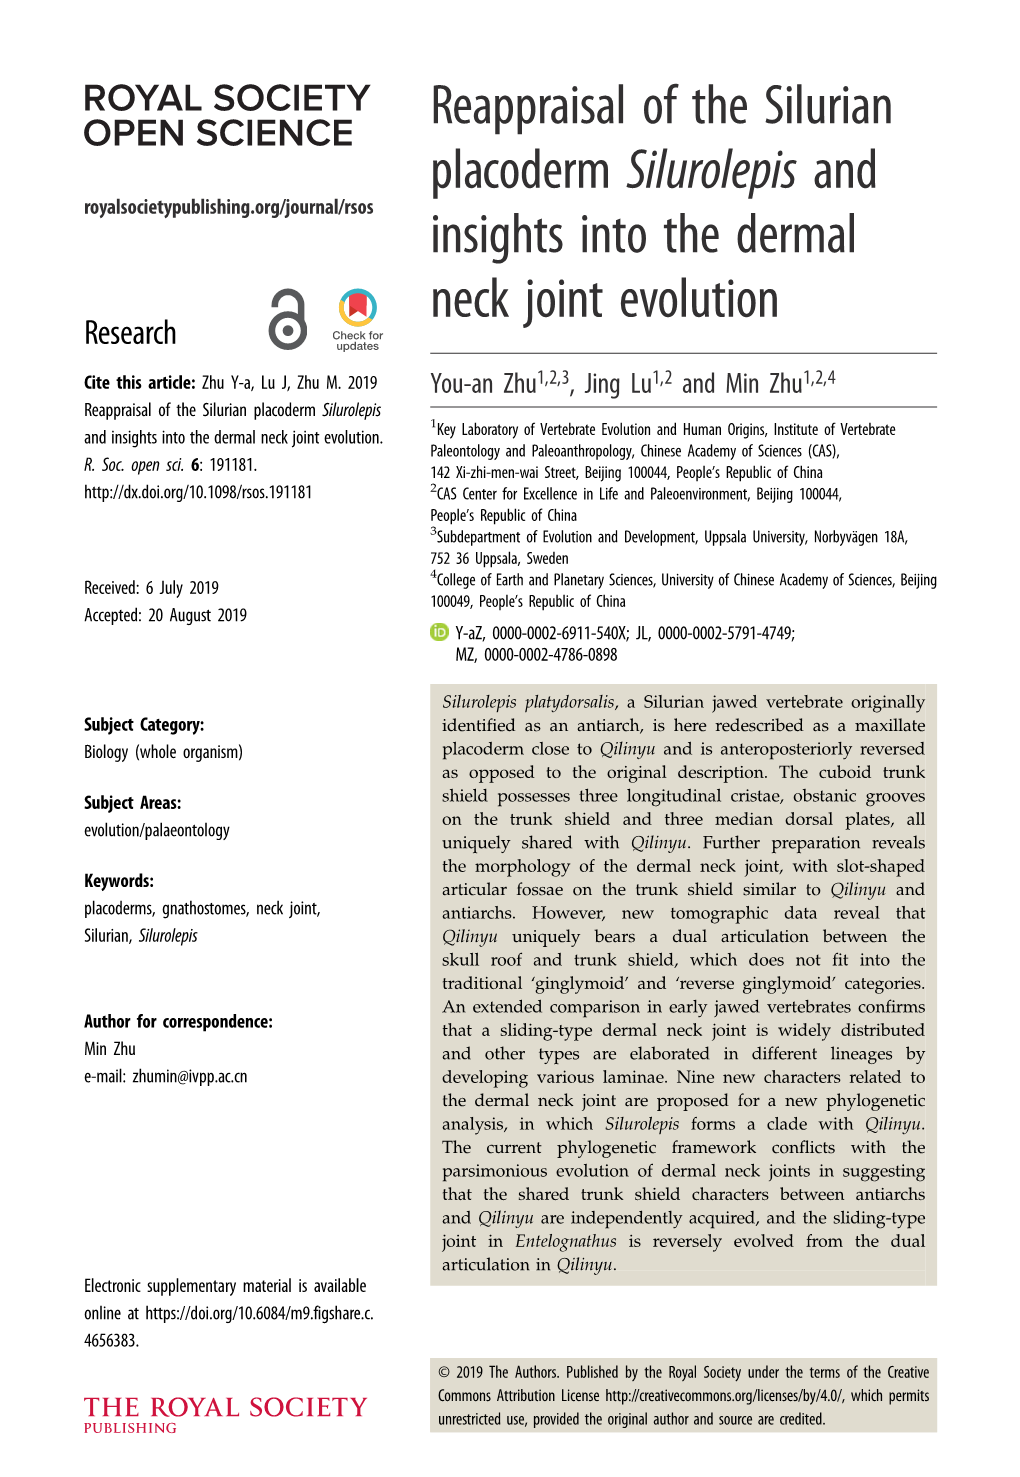 Reappraisal of the Silurian Placoderm Silurolepis and Insights Into the Dermal Neck Joint Evolution